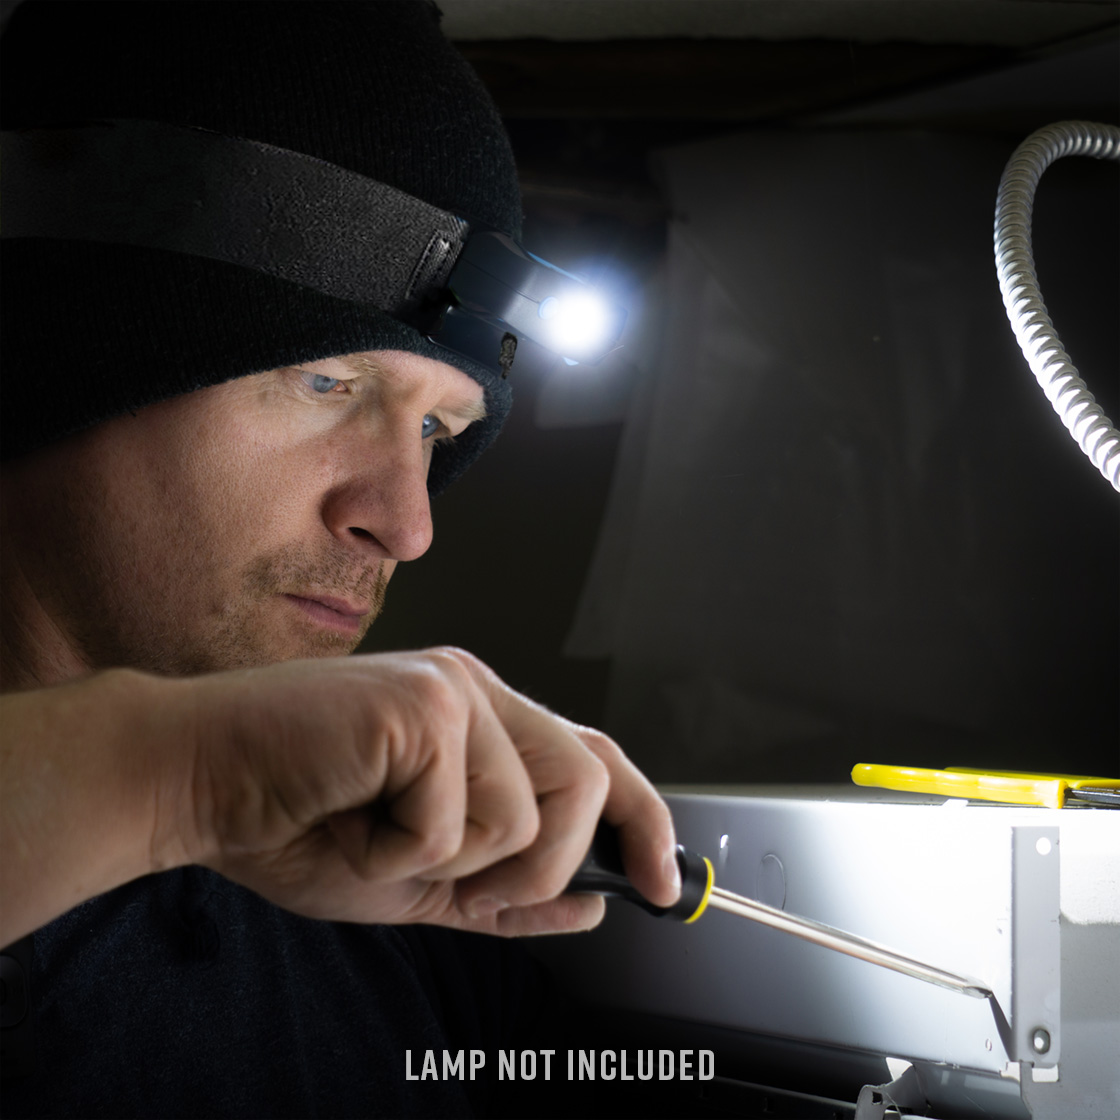 Man using Noxgear Headlamp to illuminate screwdriver use. (Lamp not included in purchase of Head Strap)